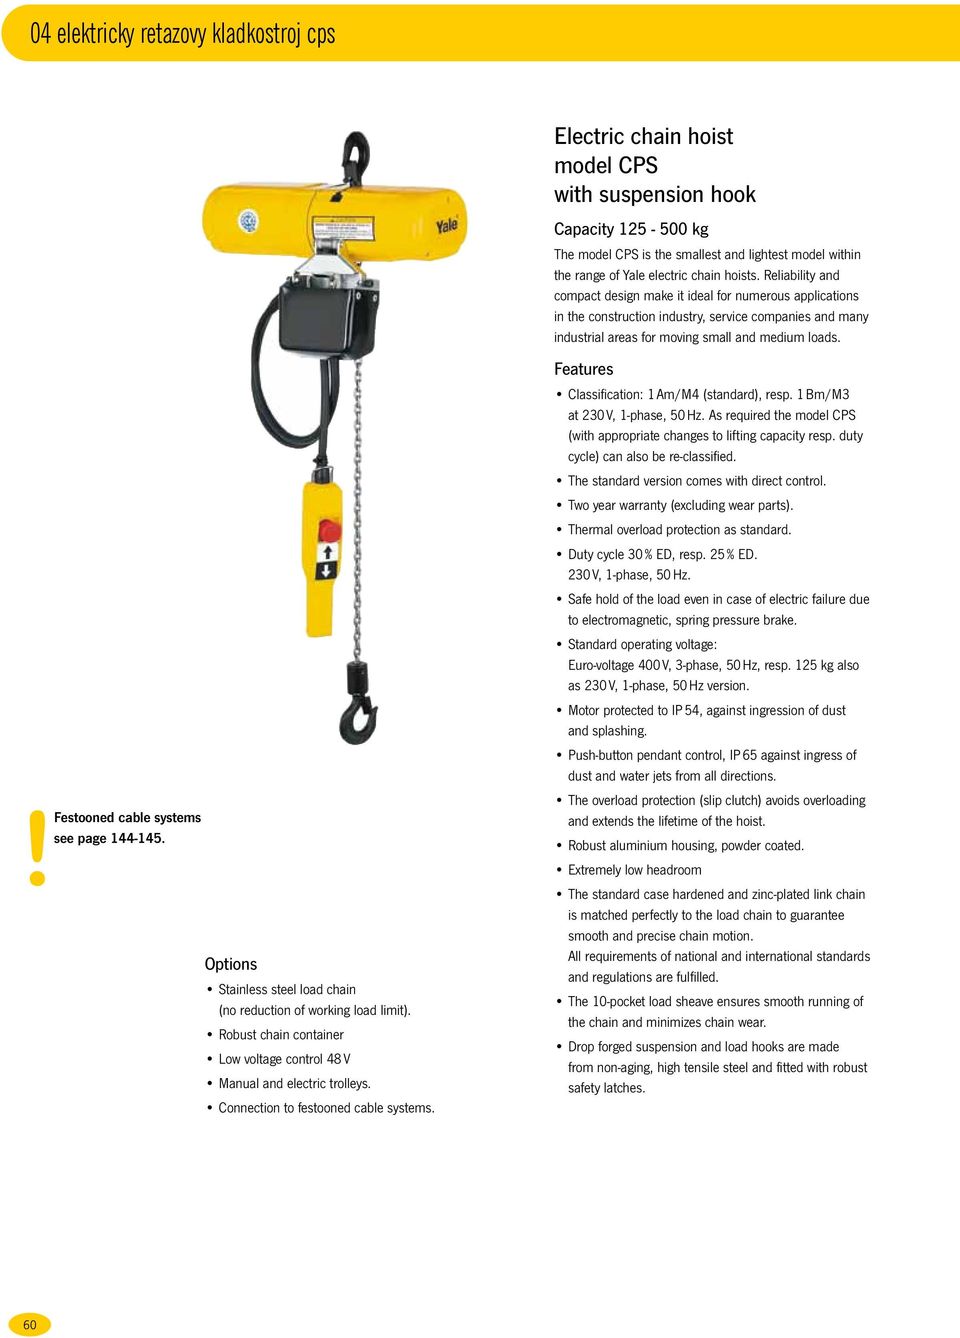 Electric chain hoist model CPS with suspension hook Capacity 125-500 The model CPS is the smallest and lightest model within the range of Yale electric chain hoists.